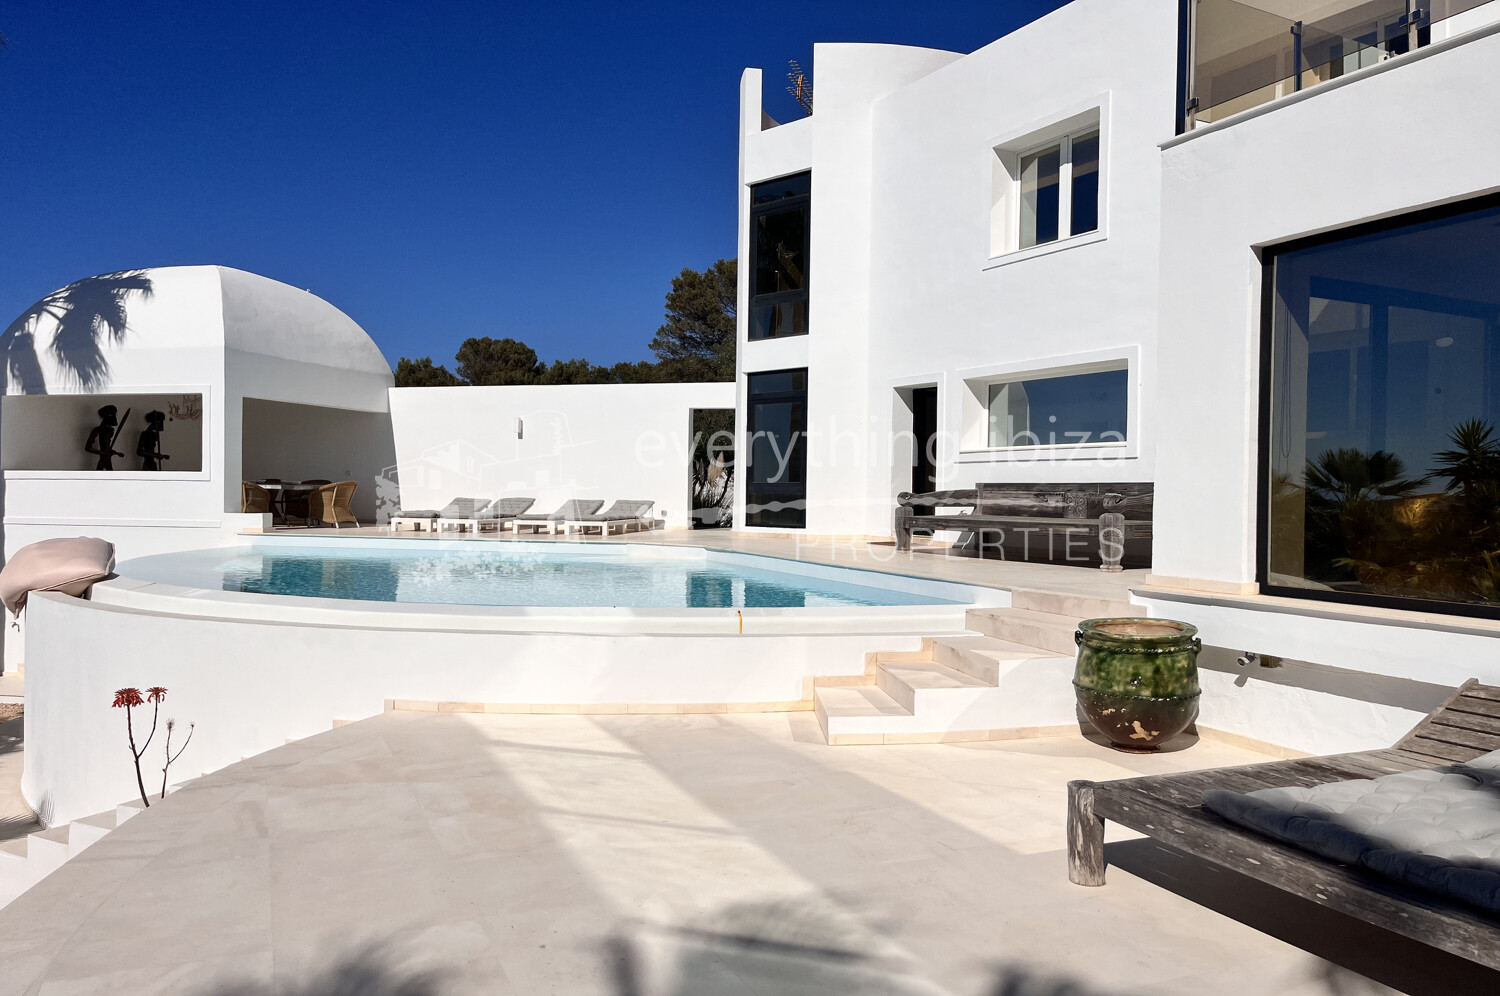 Beautiful Detached Villa with Tourist License, Sea & Sunset Views, ref. 1634, on sale in Ibiza by everything ibiza Properties